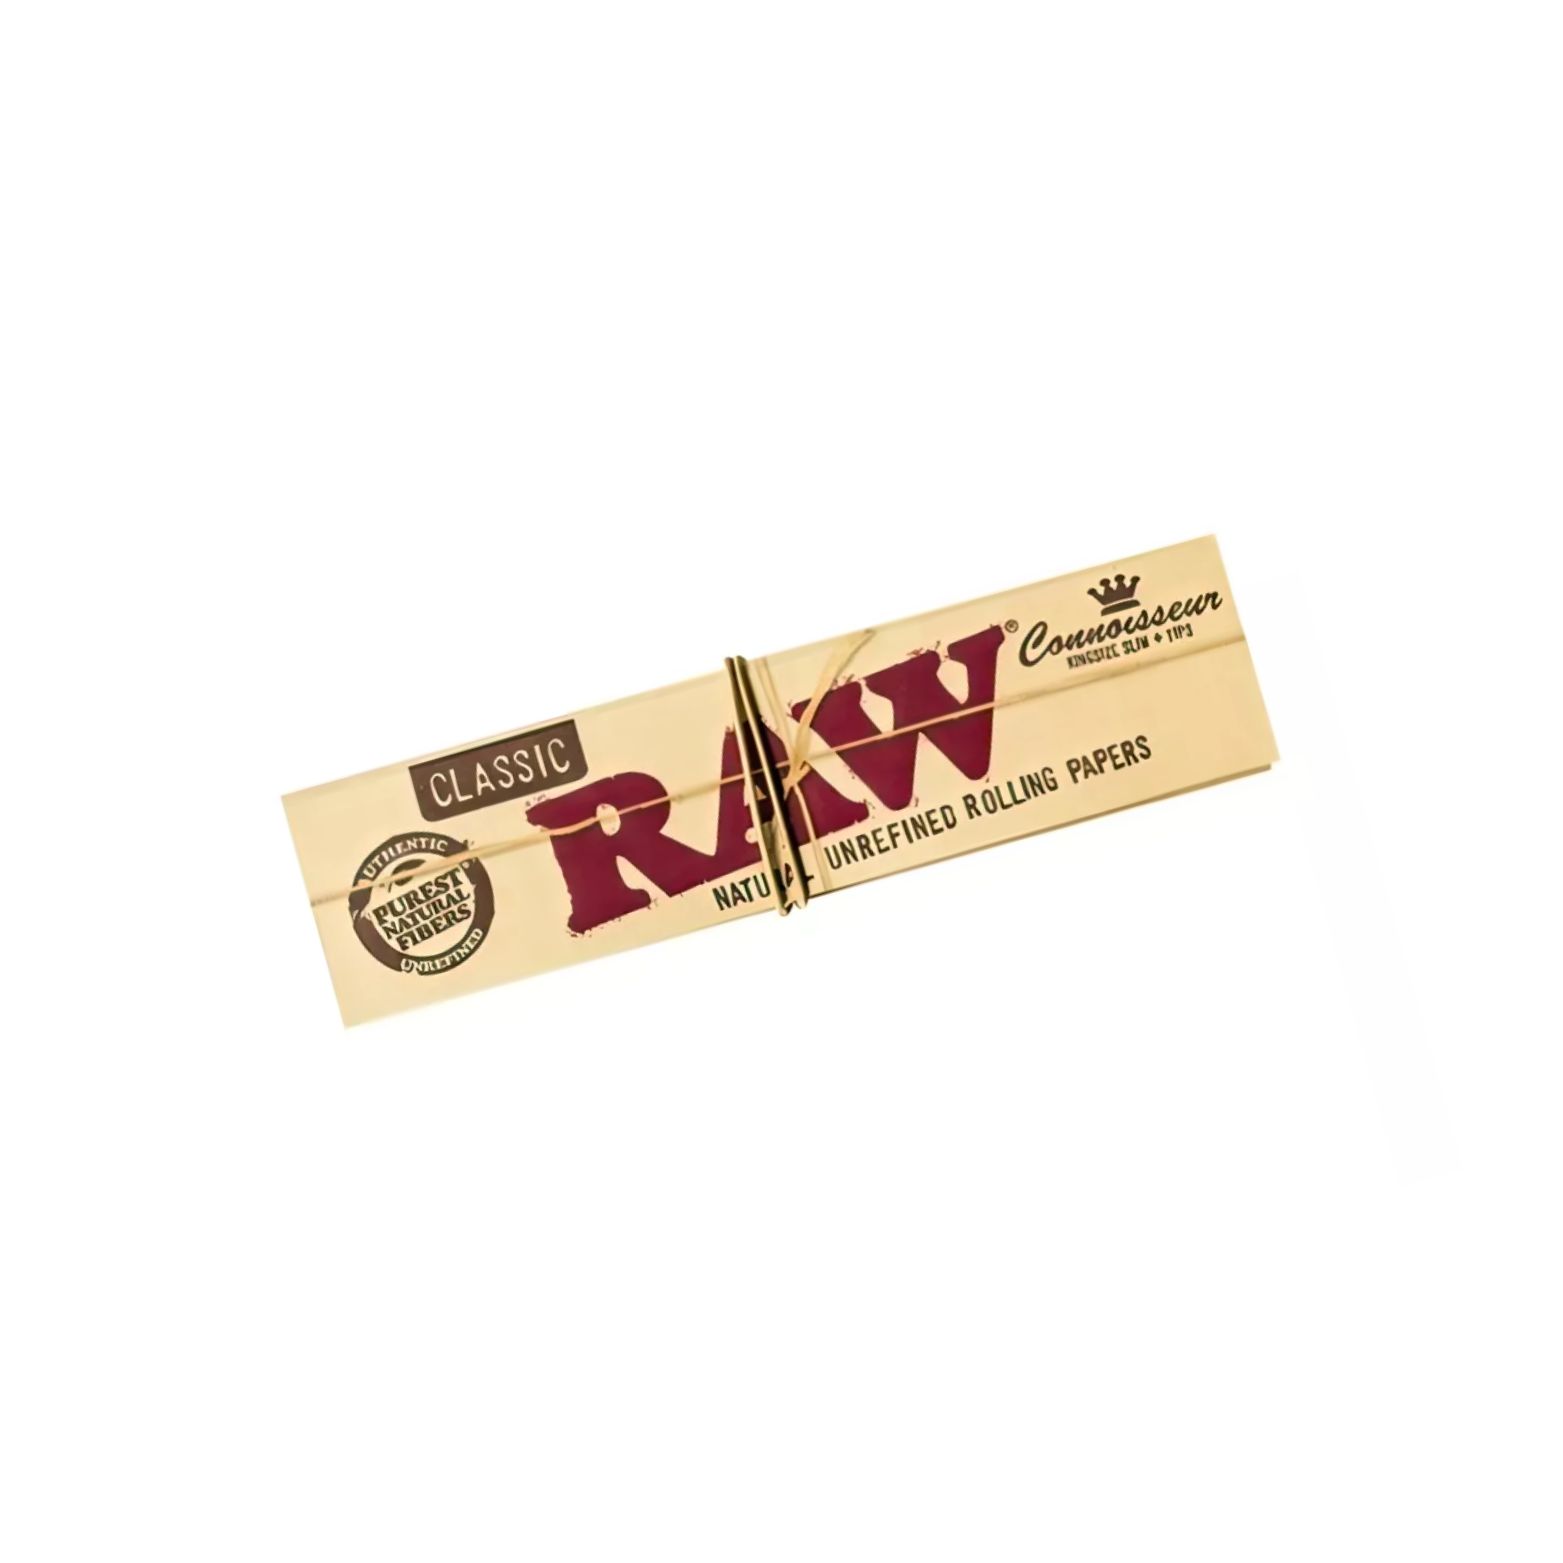 RAW Classic King Size Slim 50 papers + tips